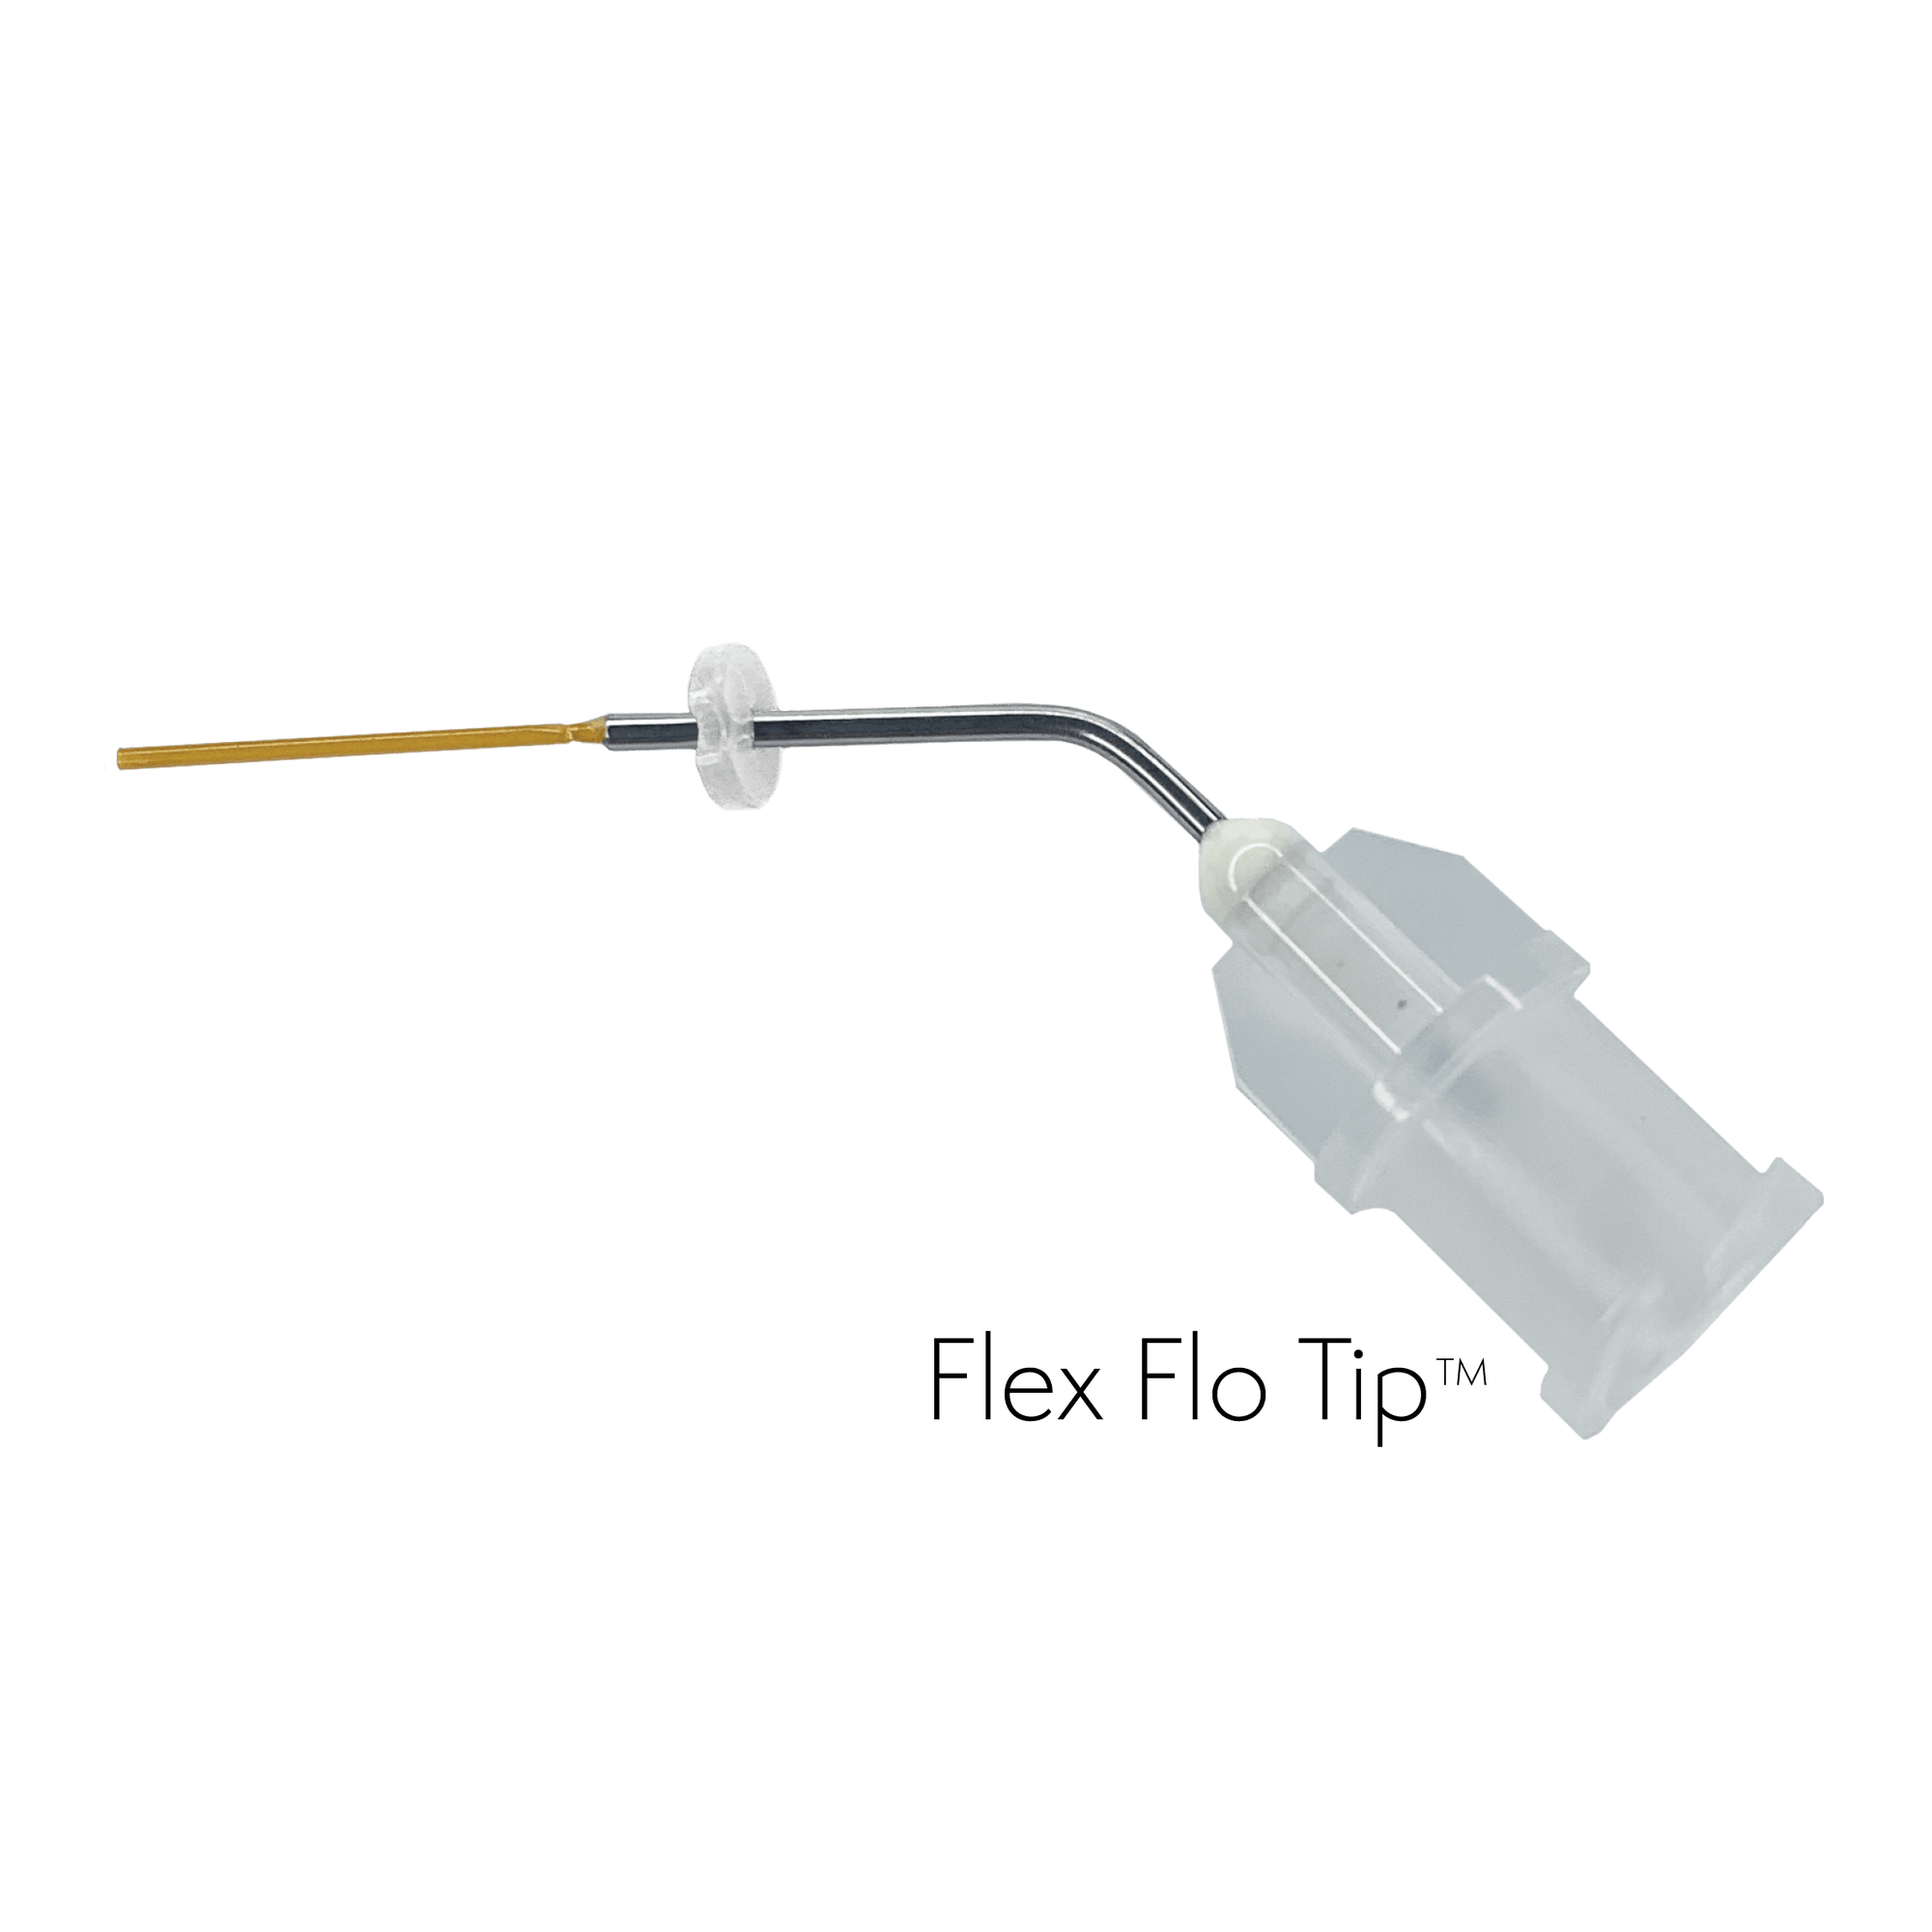 NeoSealer Flo Tips Flex Flo TipTM • 81% less waste than conventional tips when used with NeoSEALER® Flo • Integrated stopper for accuracy of placement • 25.5 gauge flexible tip to reach deep into curved and small canals Basic Flex TipTM • 29% less waste t